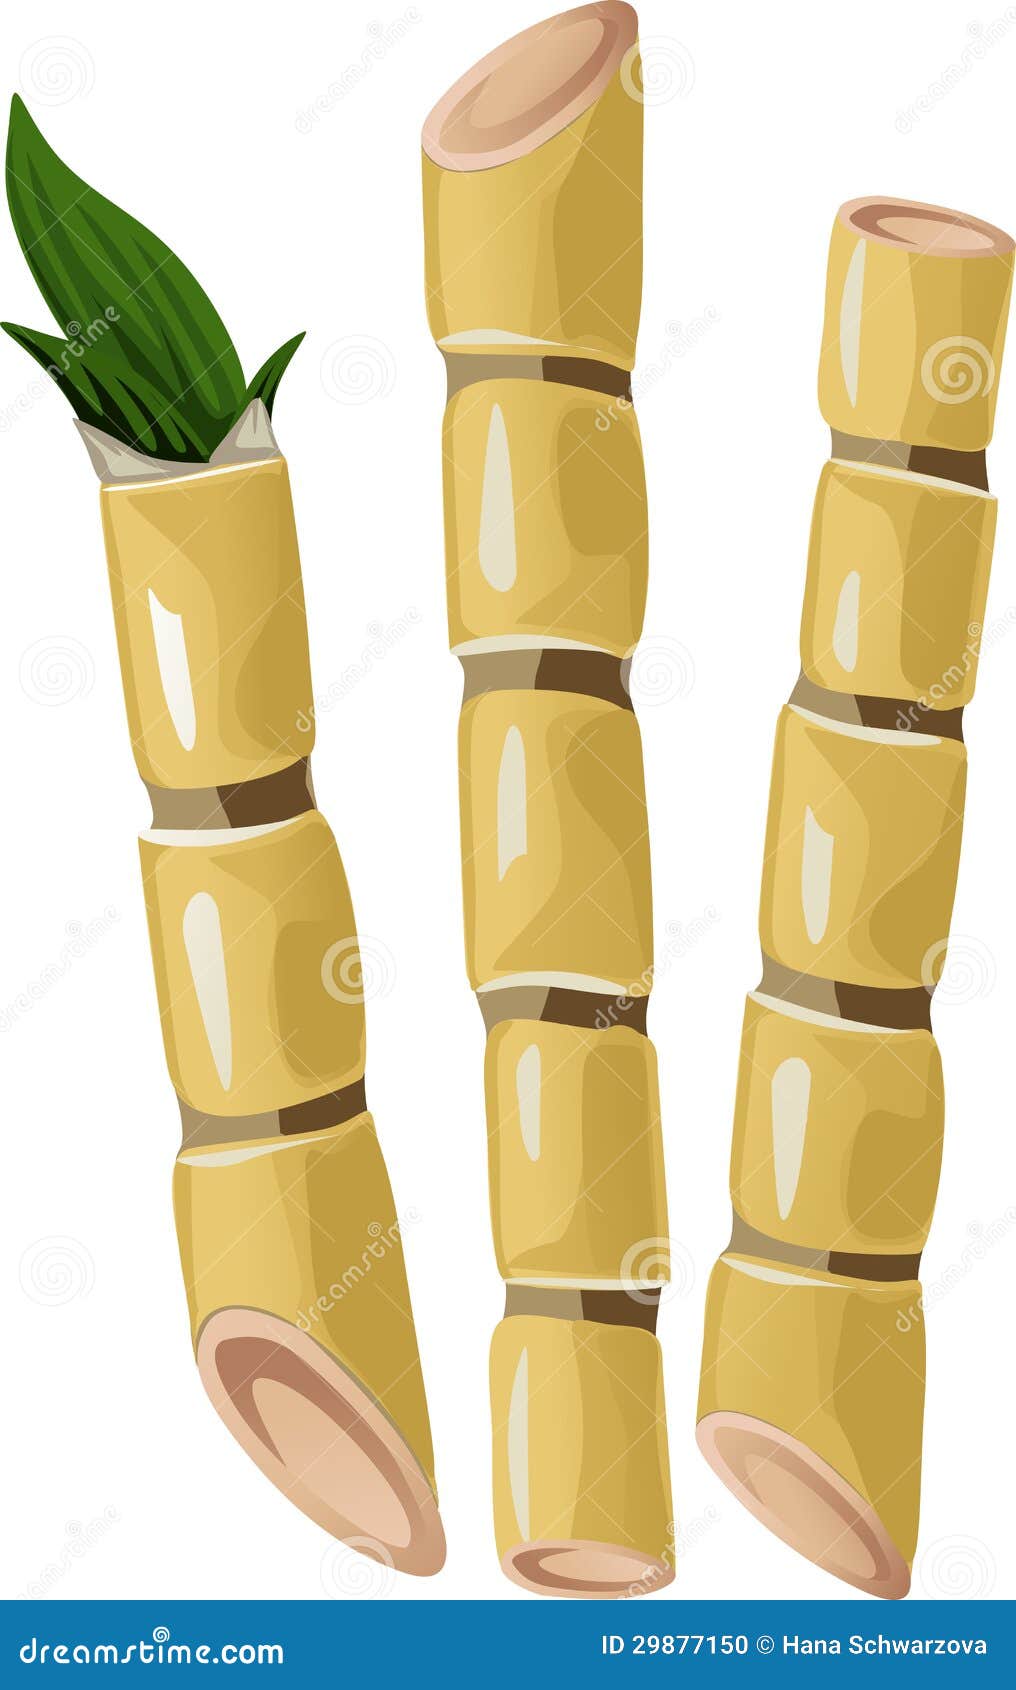 Sugarcane Cartoons, Illustrations & Vector Stock Images - 702 Pictures